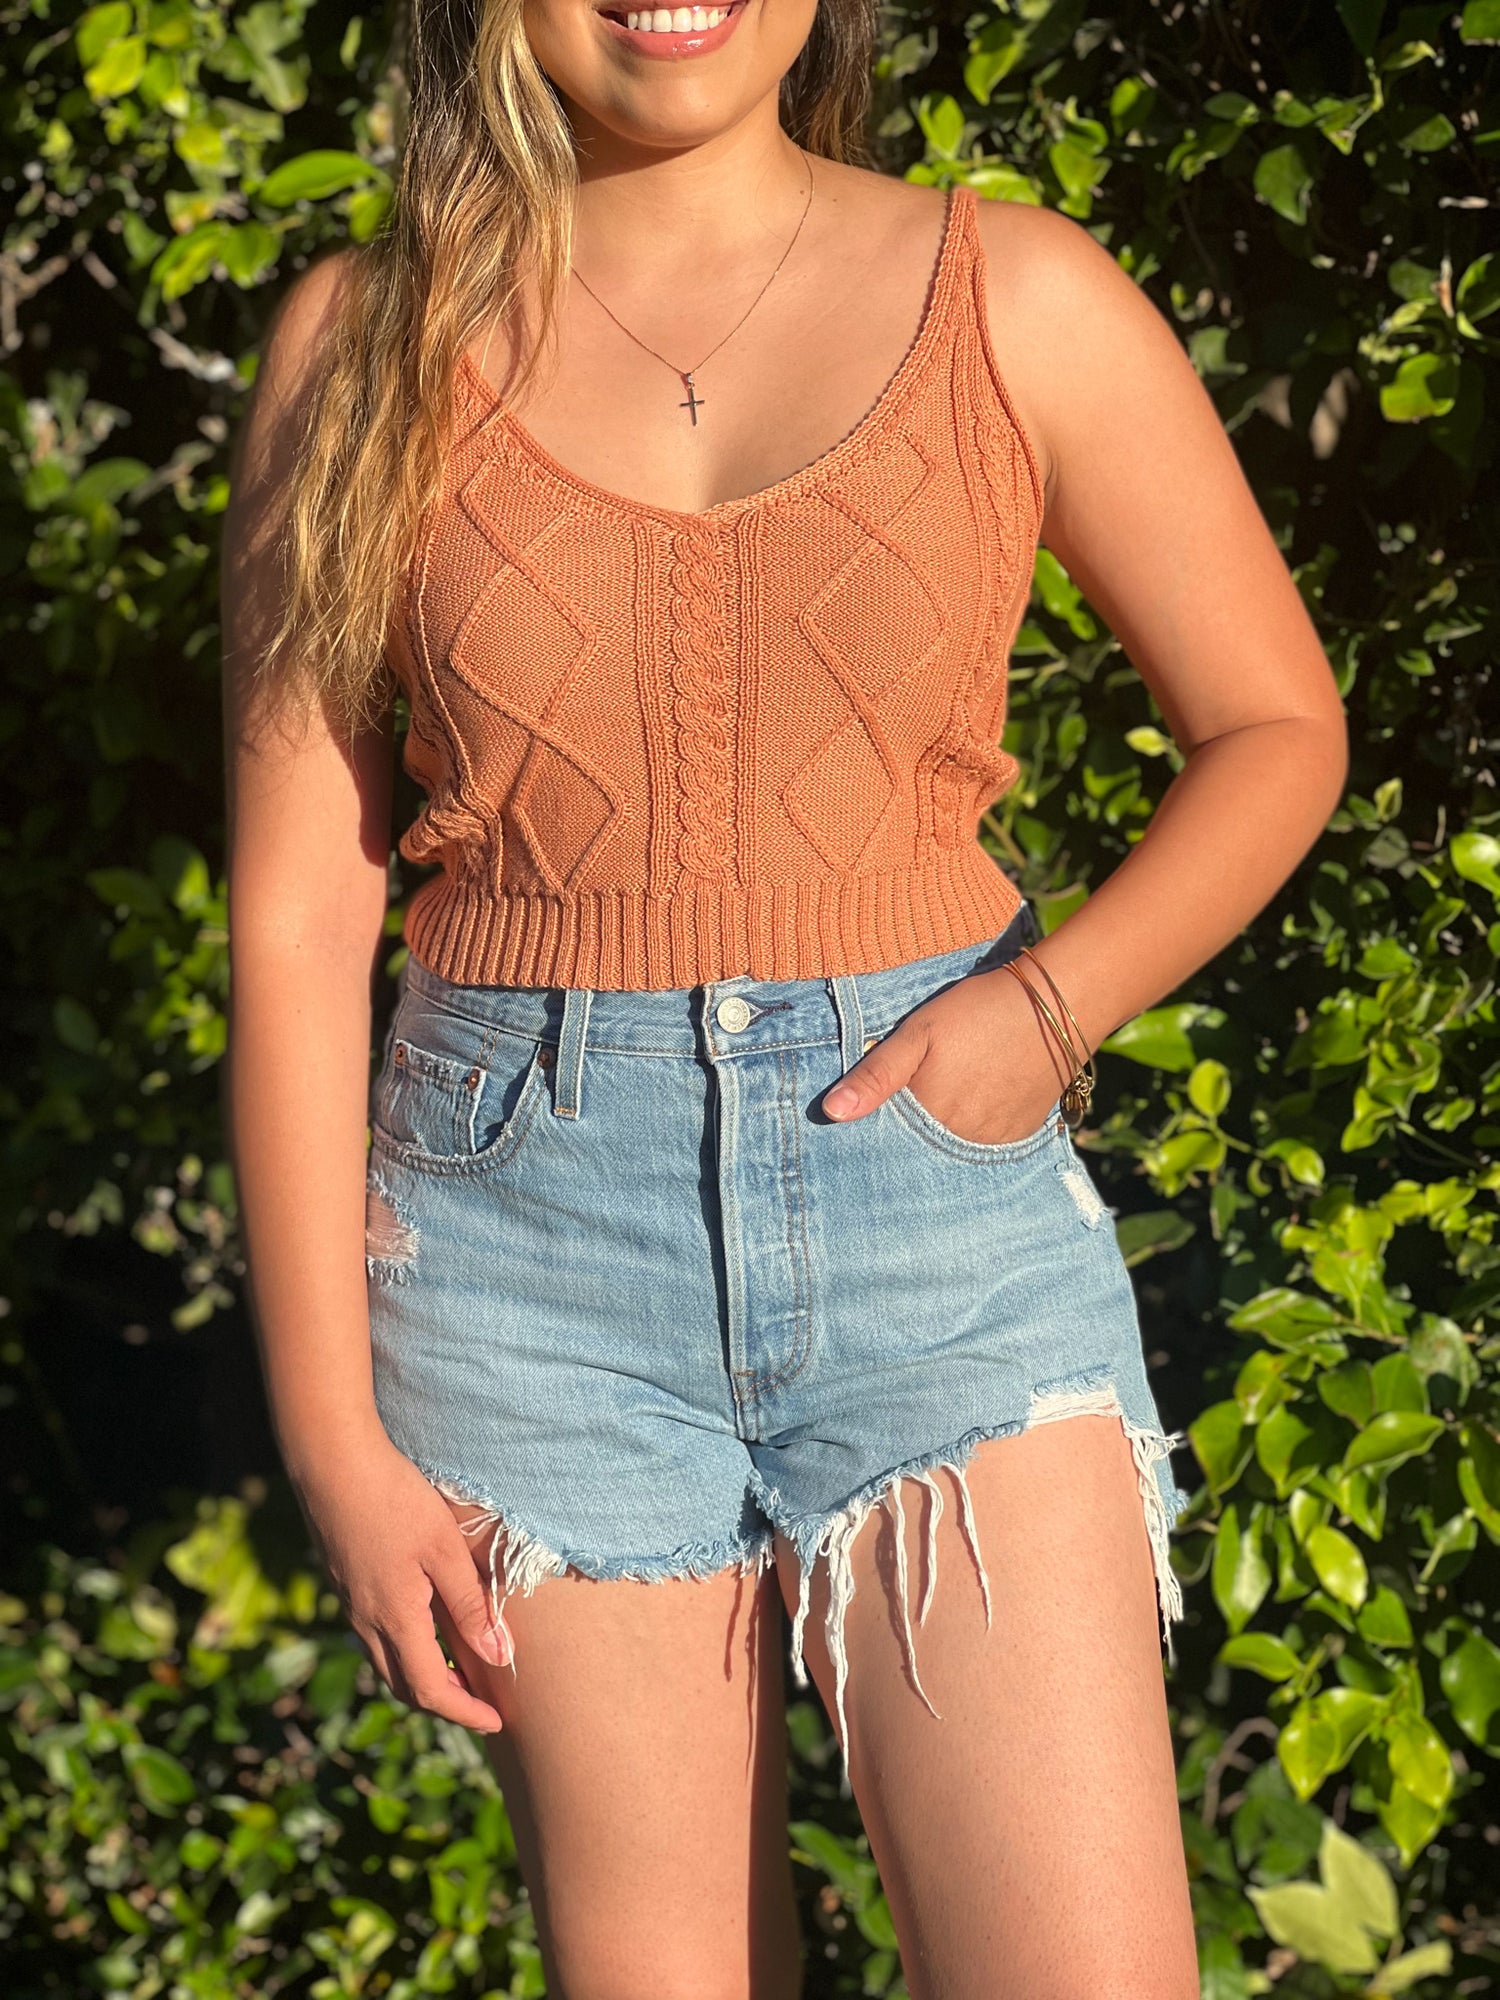 Sunrise Crochet Top comes in 2 colors. Crochet Top is a V-Neck. 100% Polyester. Perfect for the summer. Just throw on some shorts and you're ready to go!.